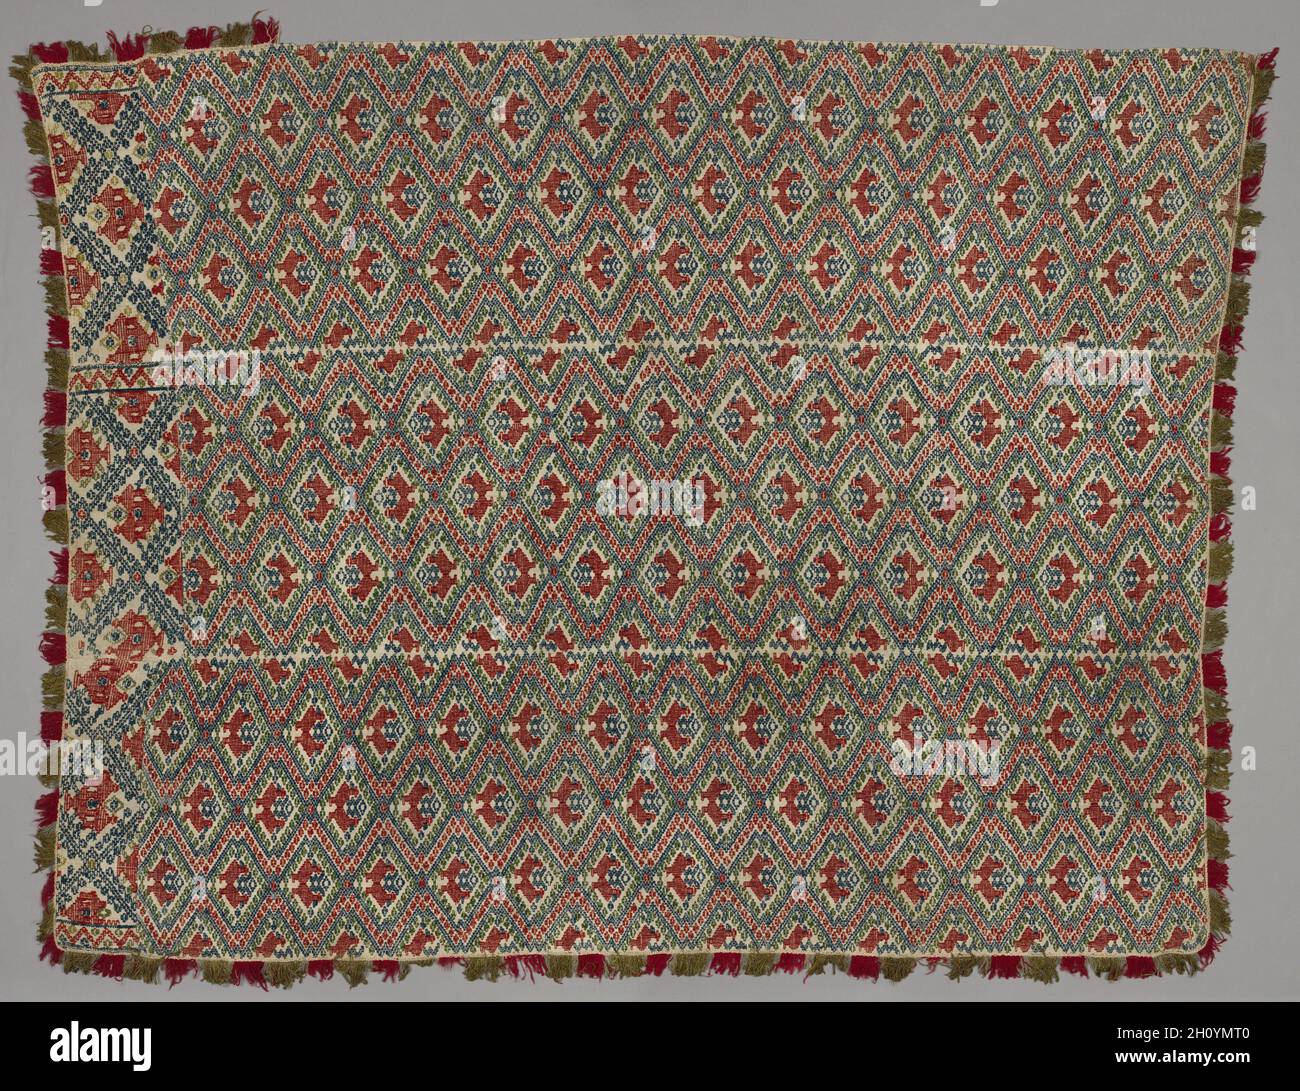 Bedspread, 17th-18th century. Italy, Sicily, 17th-18th century. Linen ornamented with woolen brocading; overall: 223.5 x 175.2 cm (88 x 69 in.). Stock Photo